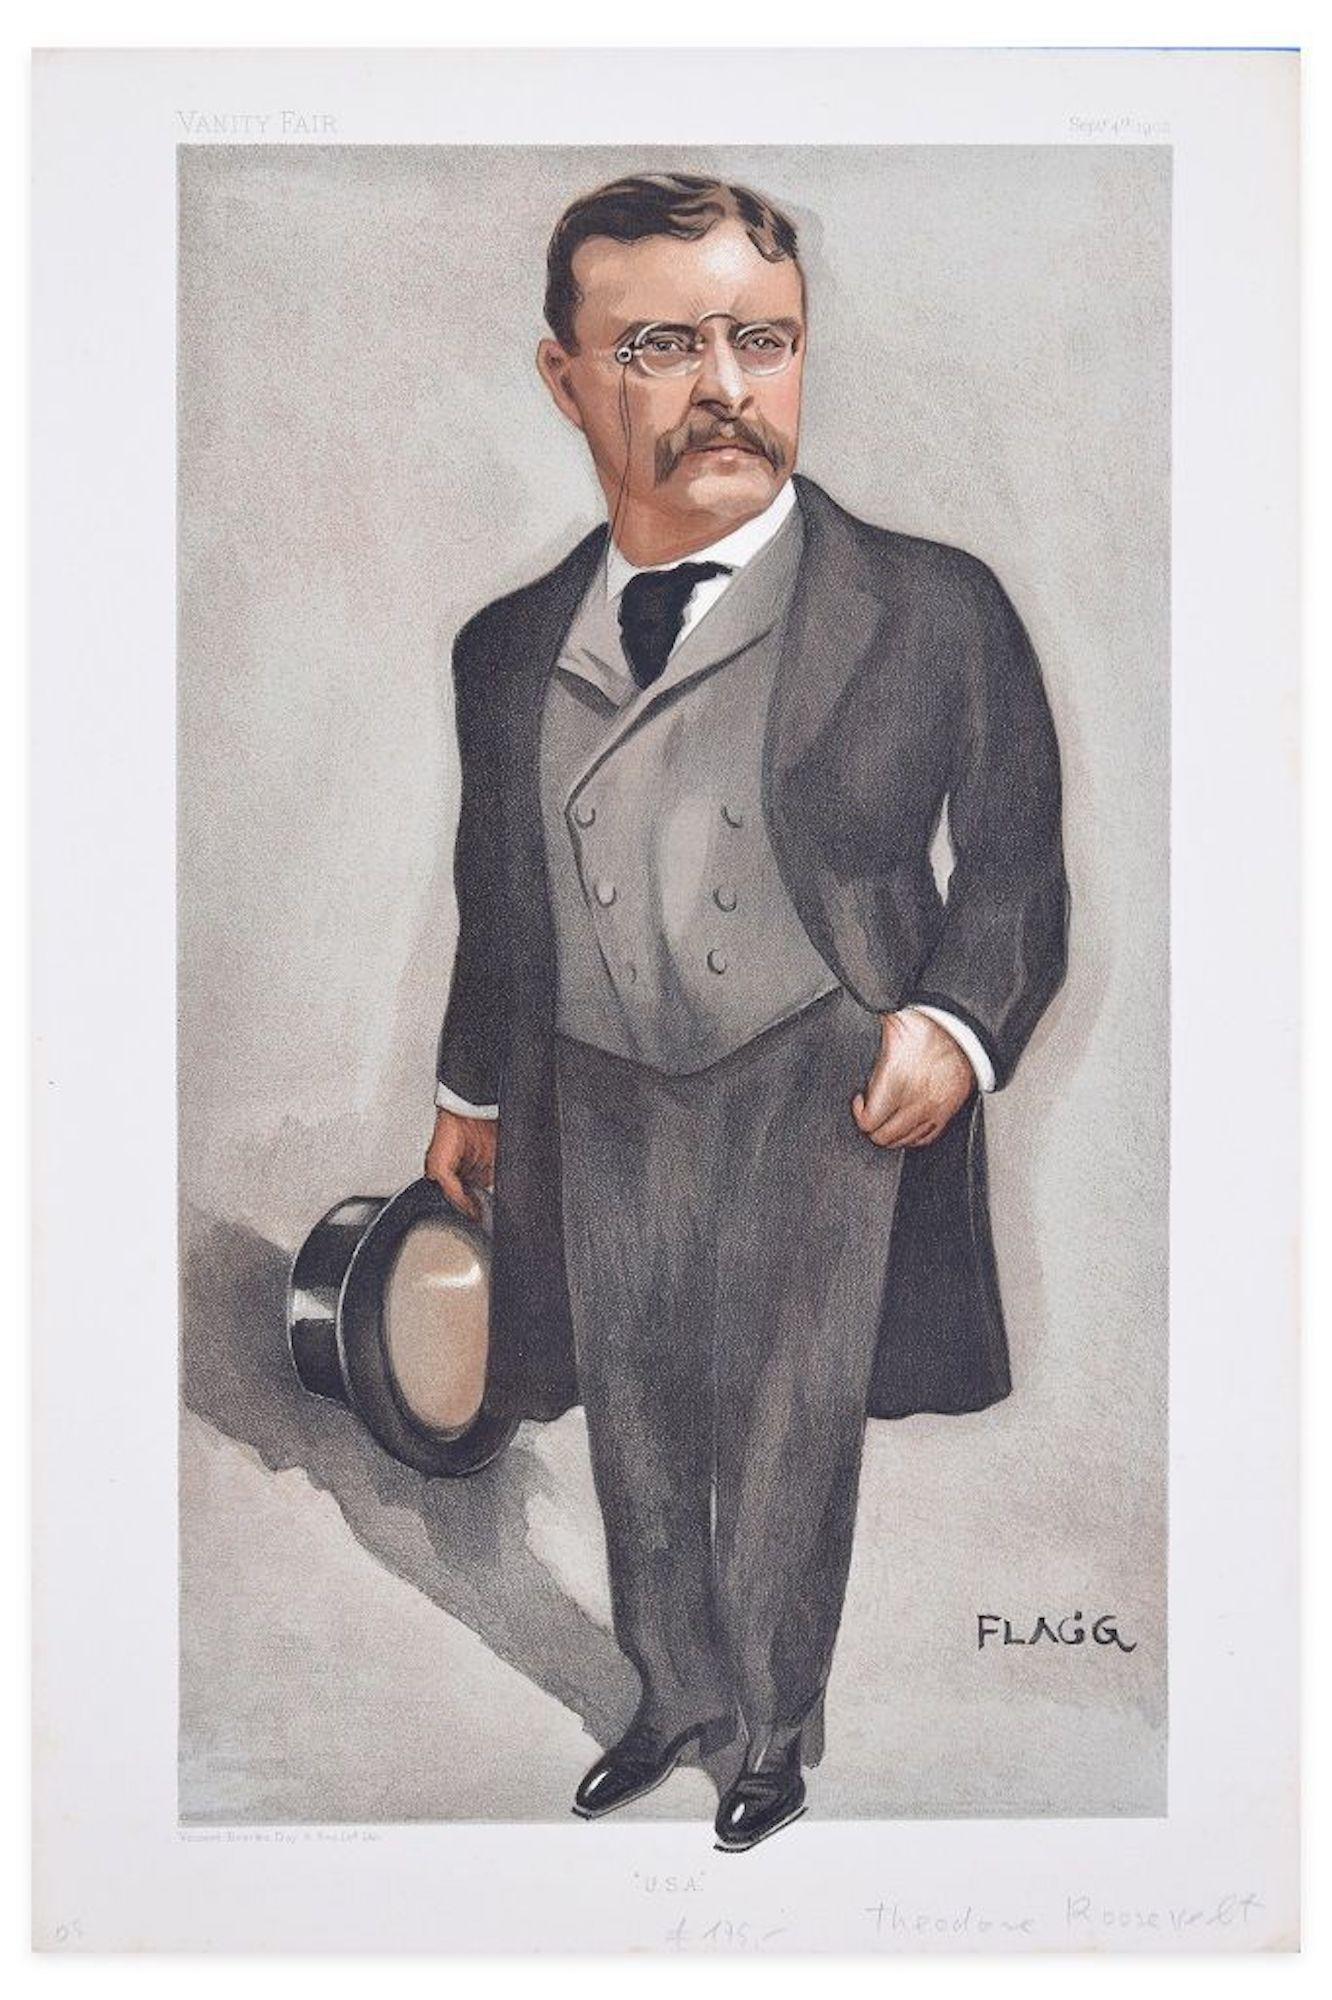 James Montgomery Flagg Portrait Print - Theodore Roosevelt - Chromolithograph for "Vanity Fair" After J.M. Flagg - 1902